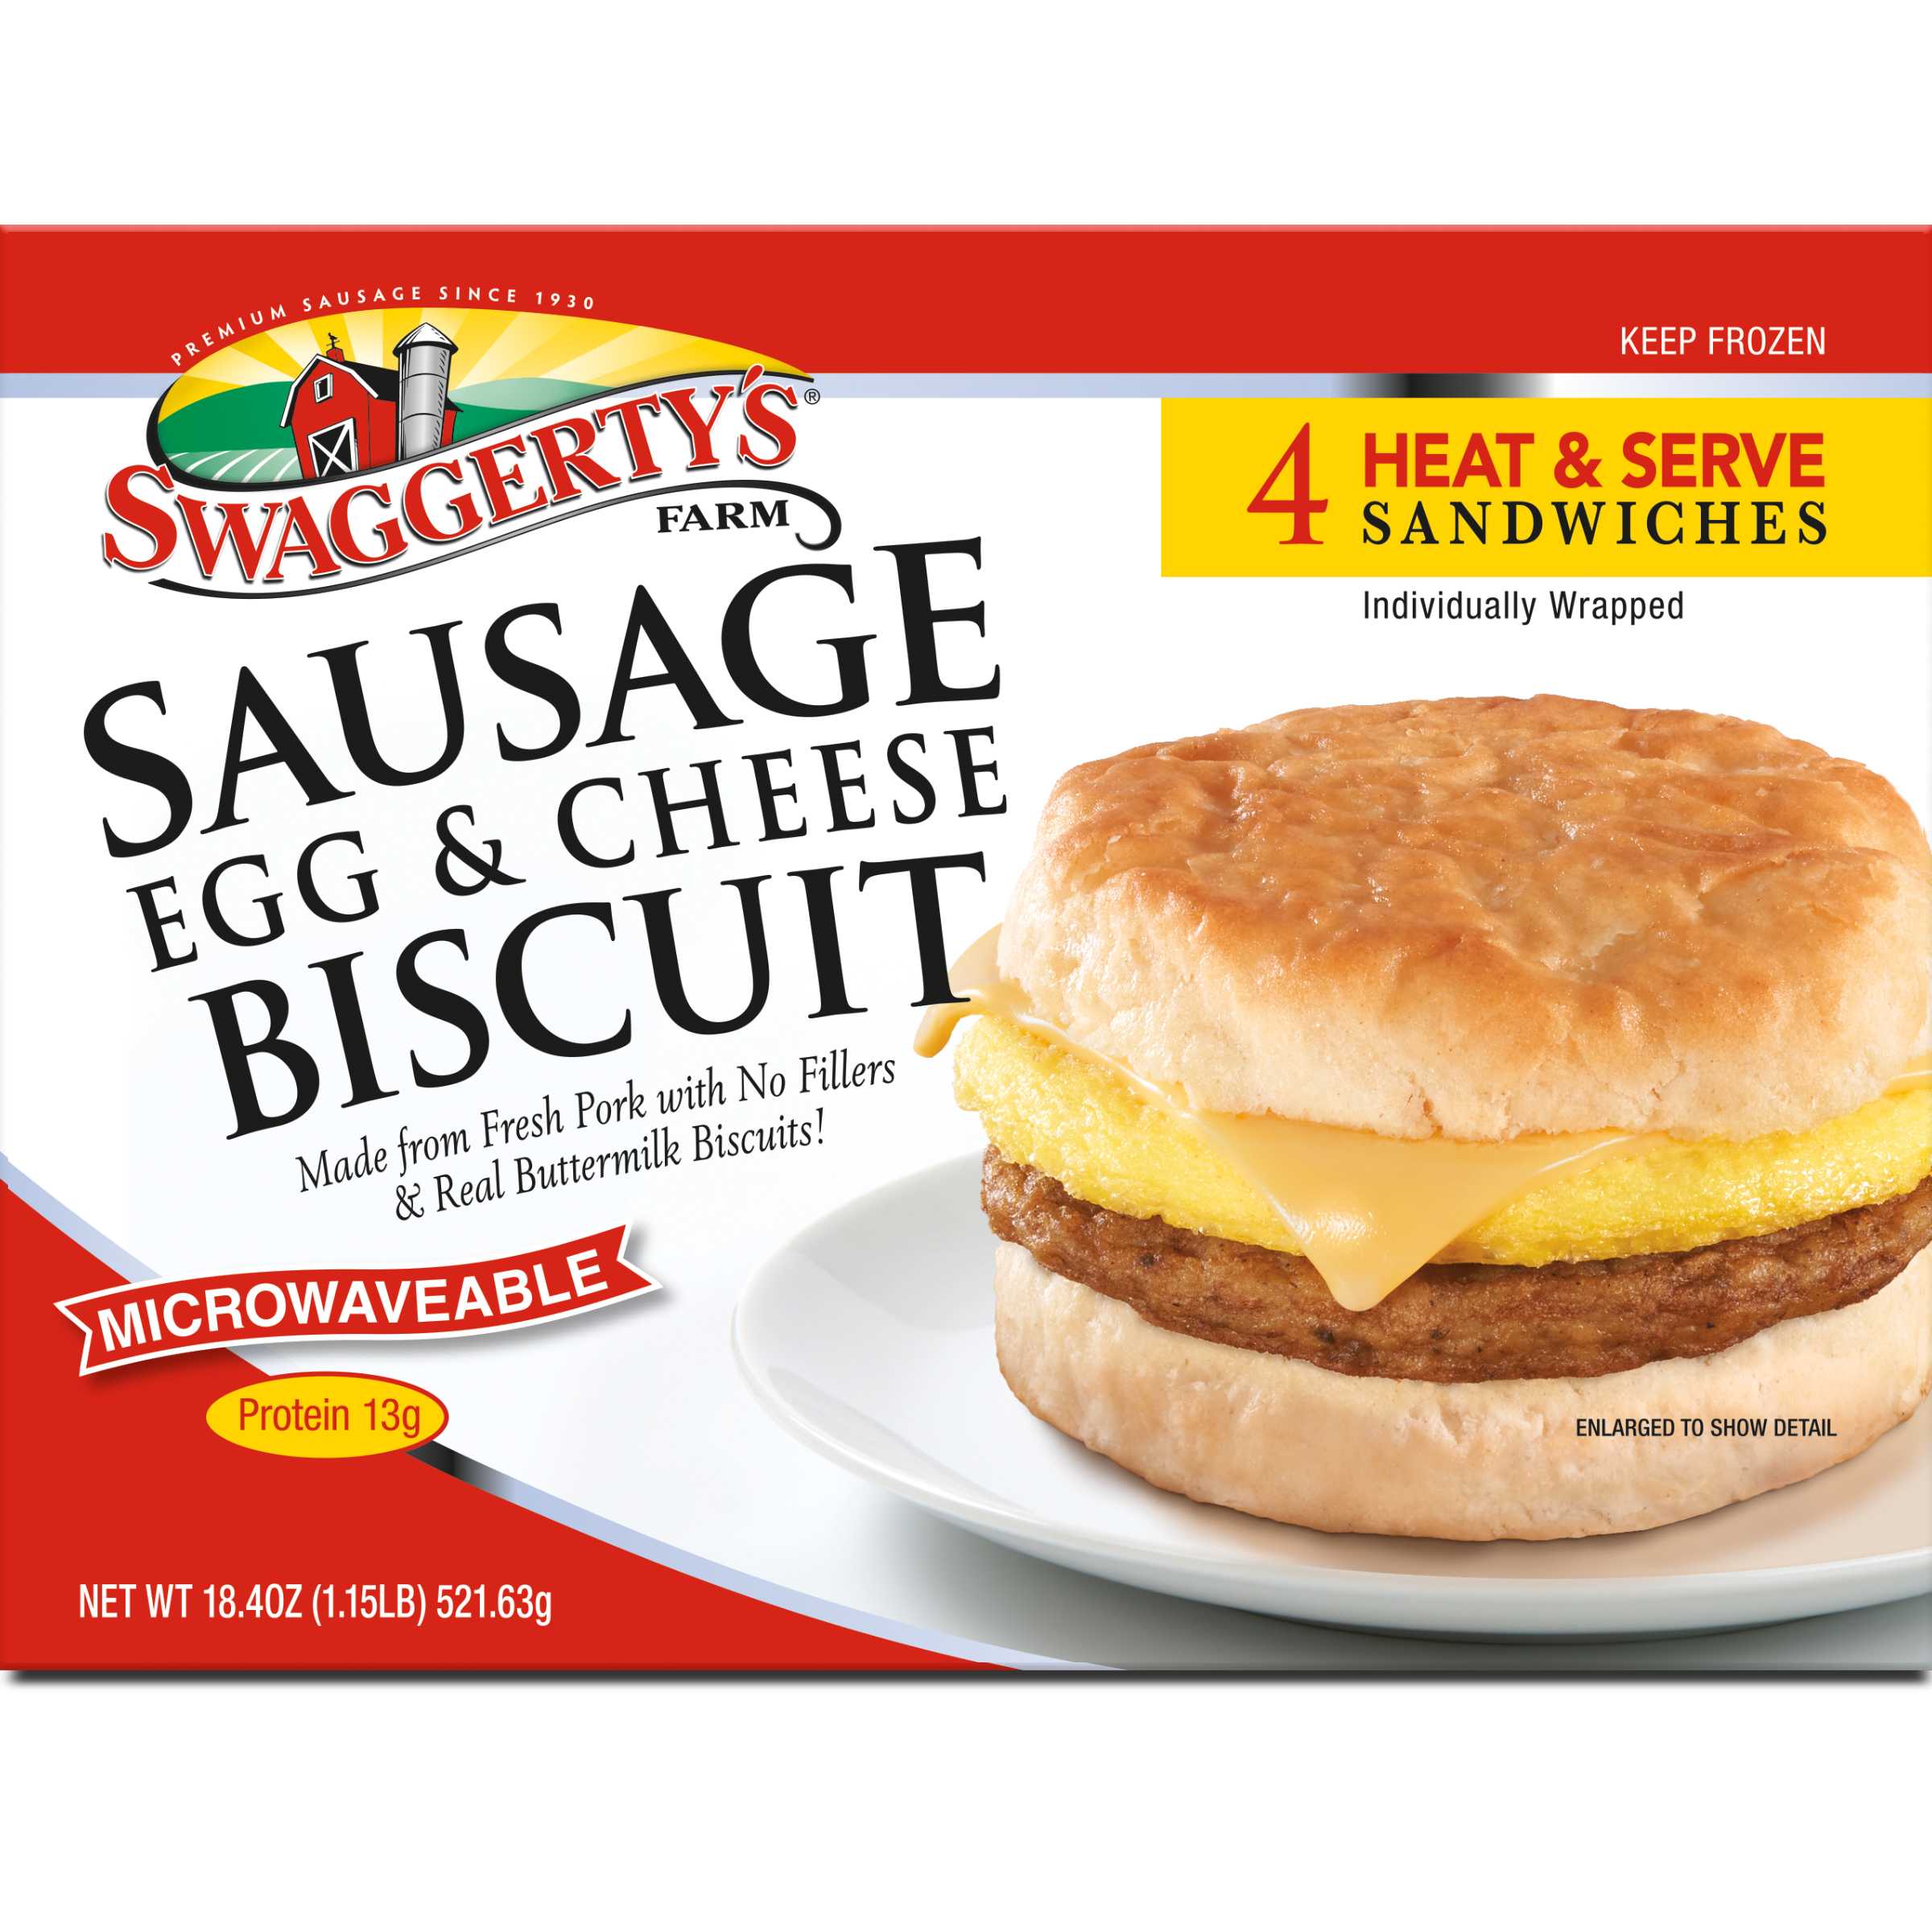 Swaggerty's Farm Sausage Egg, Cheese Buttermilk Biscuits Product